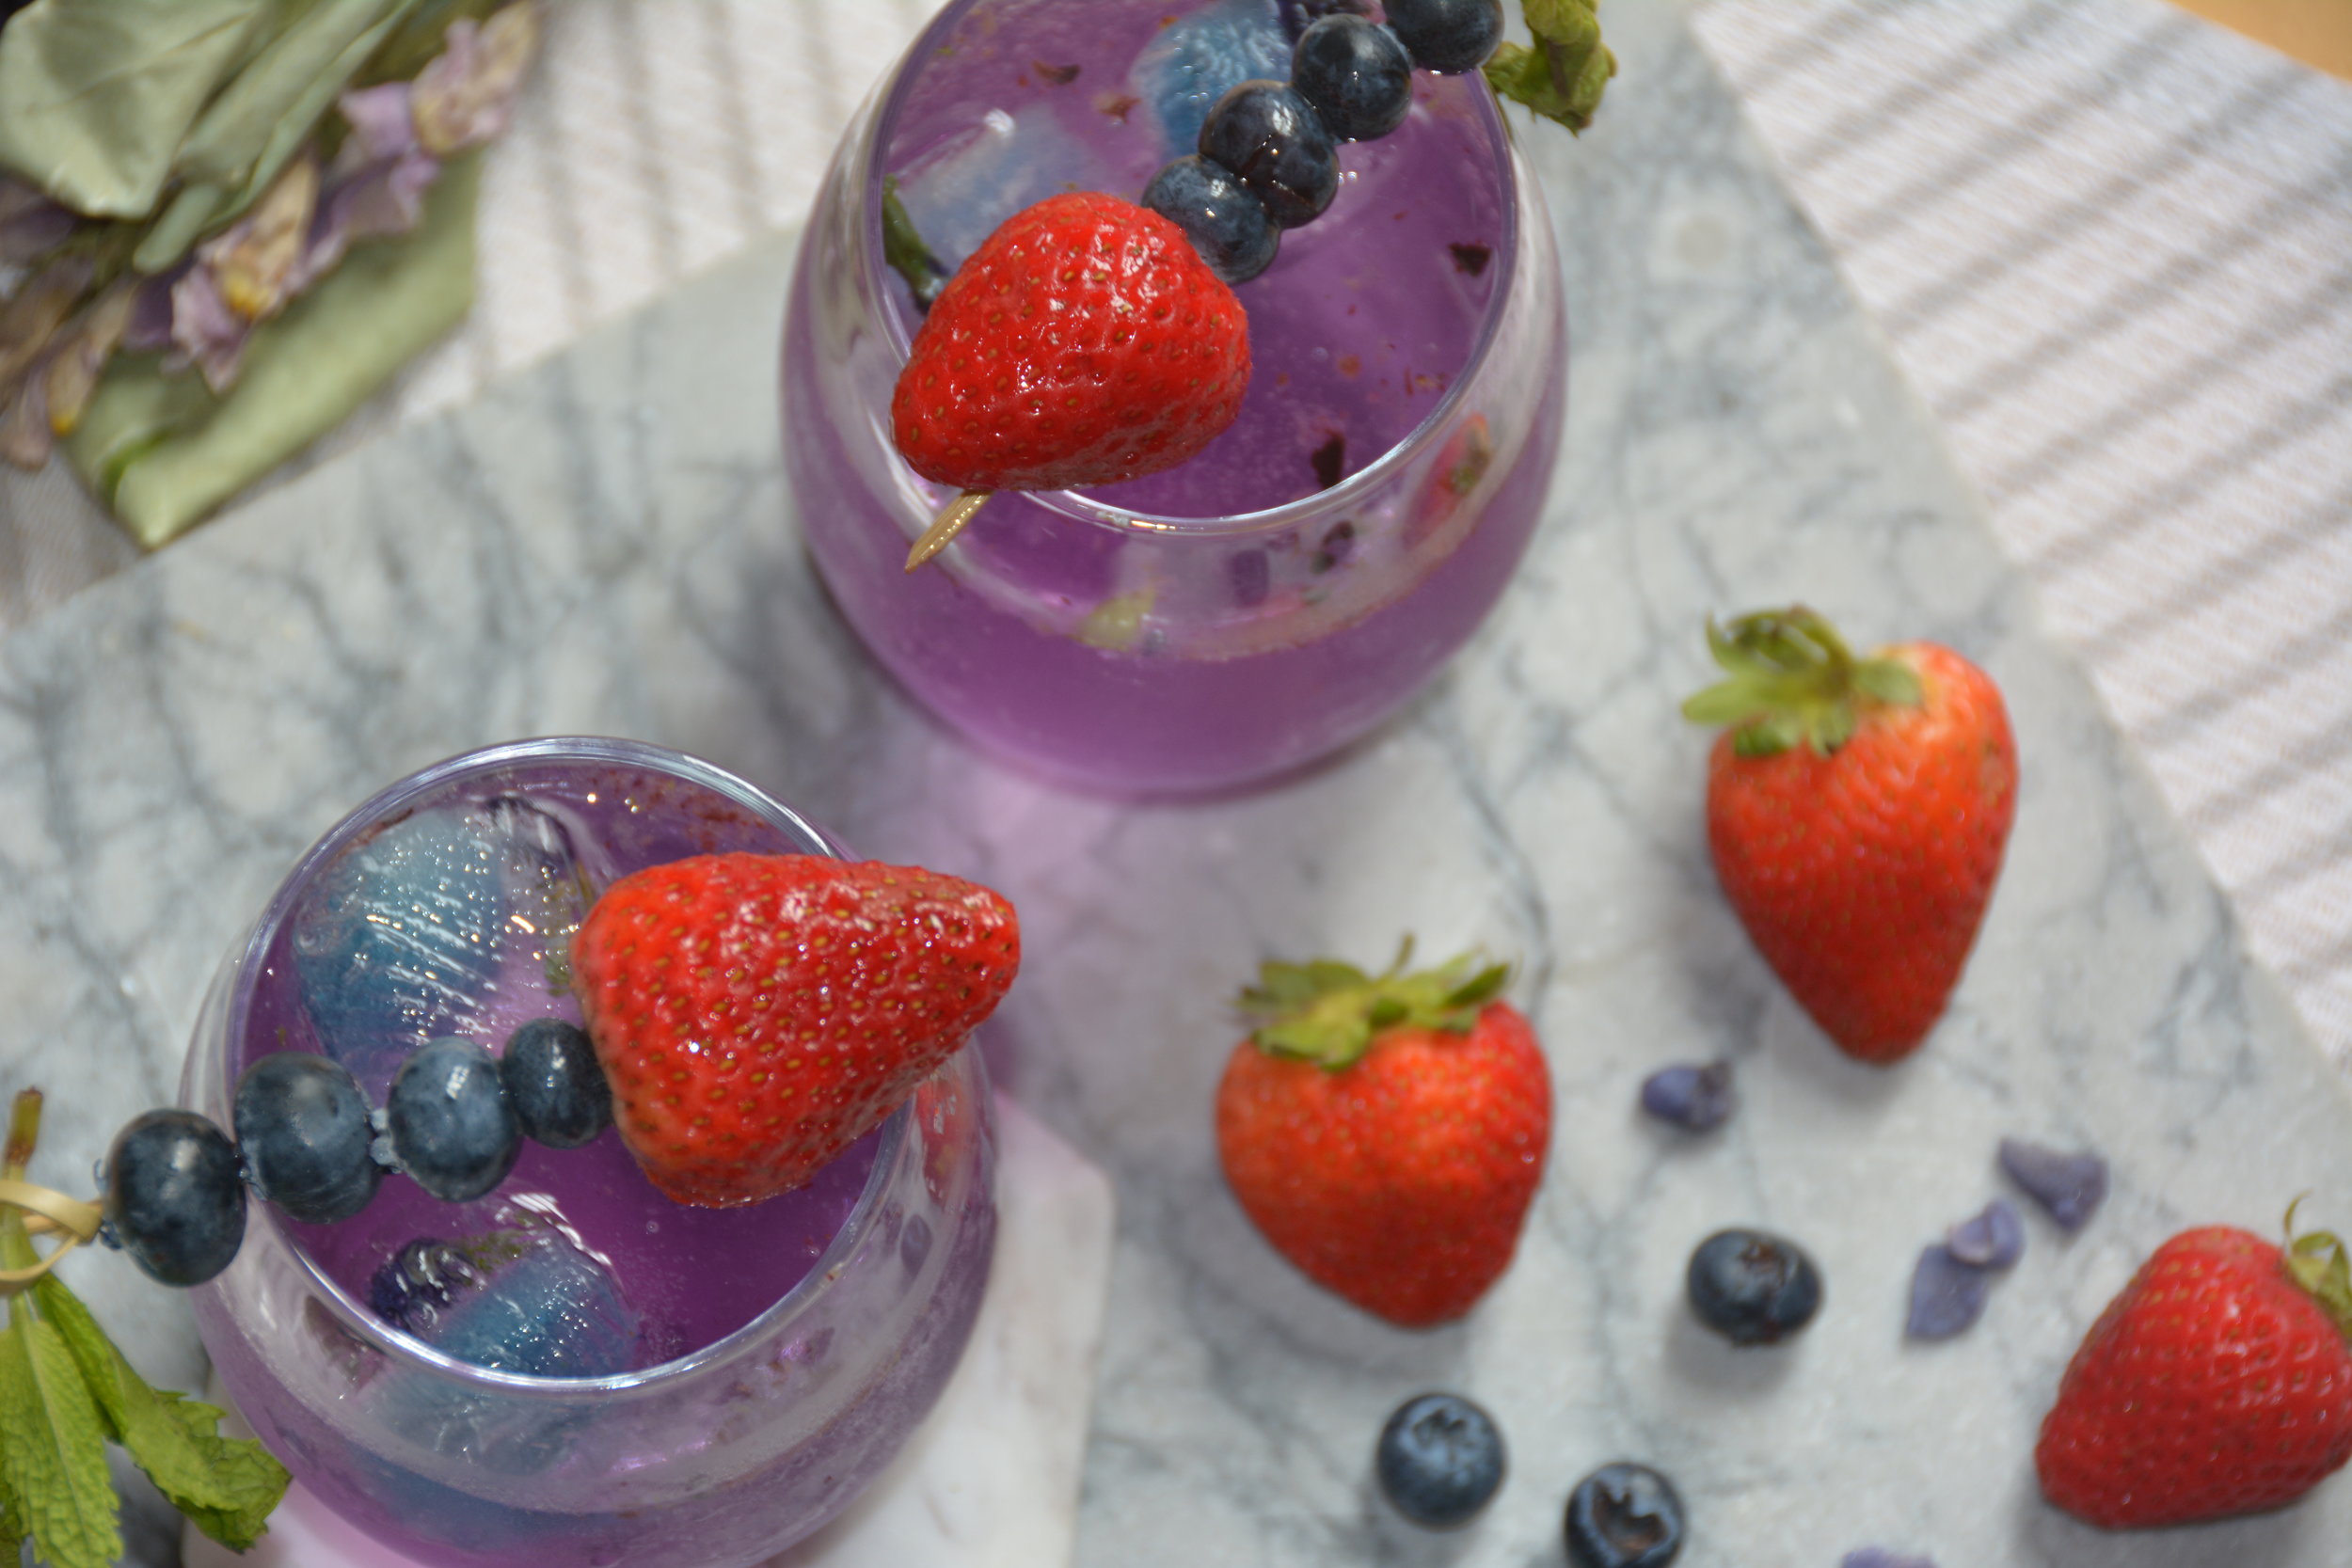 How to Make a Butterfly Pea with Brewed Tea and Strawberry Syrup